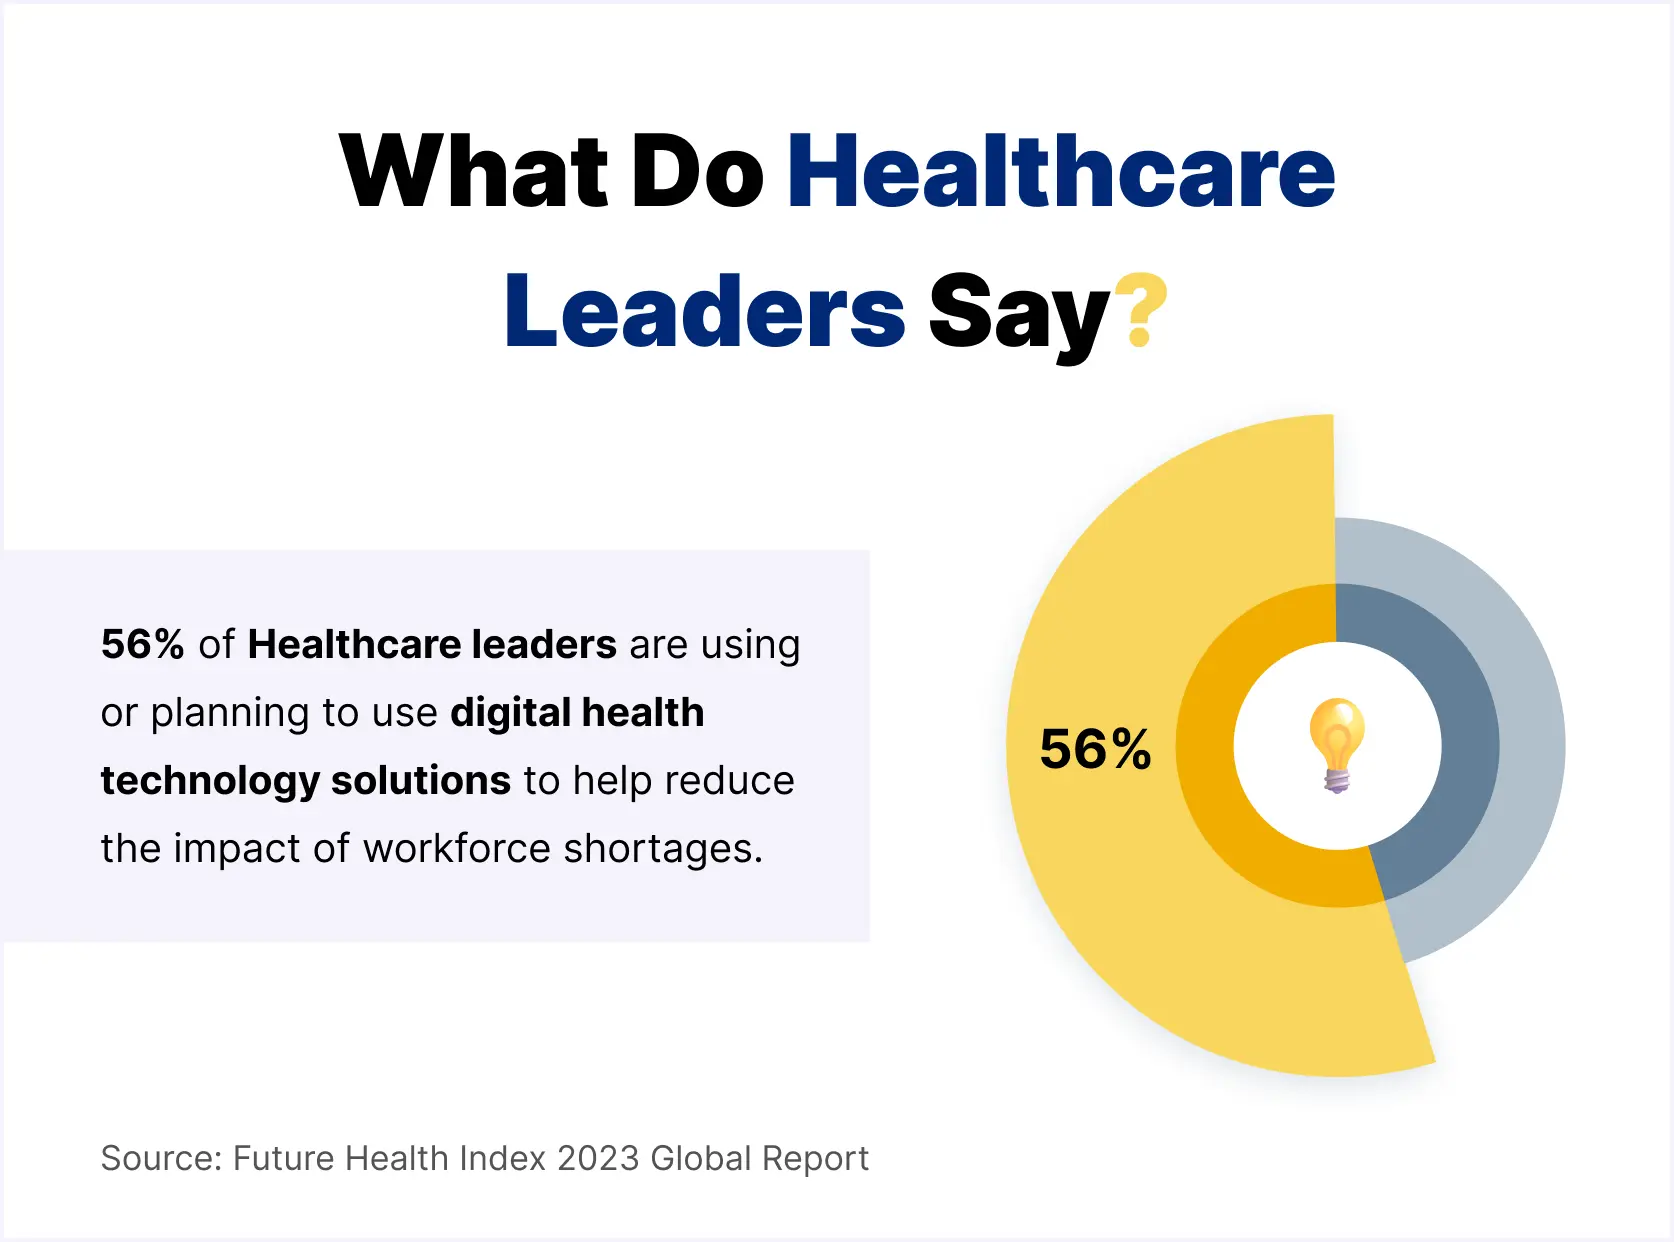 What Do Healthcare Leaders Say?